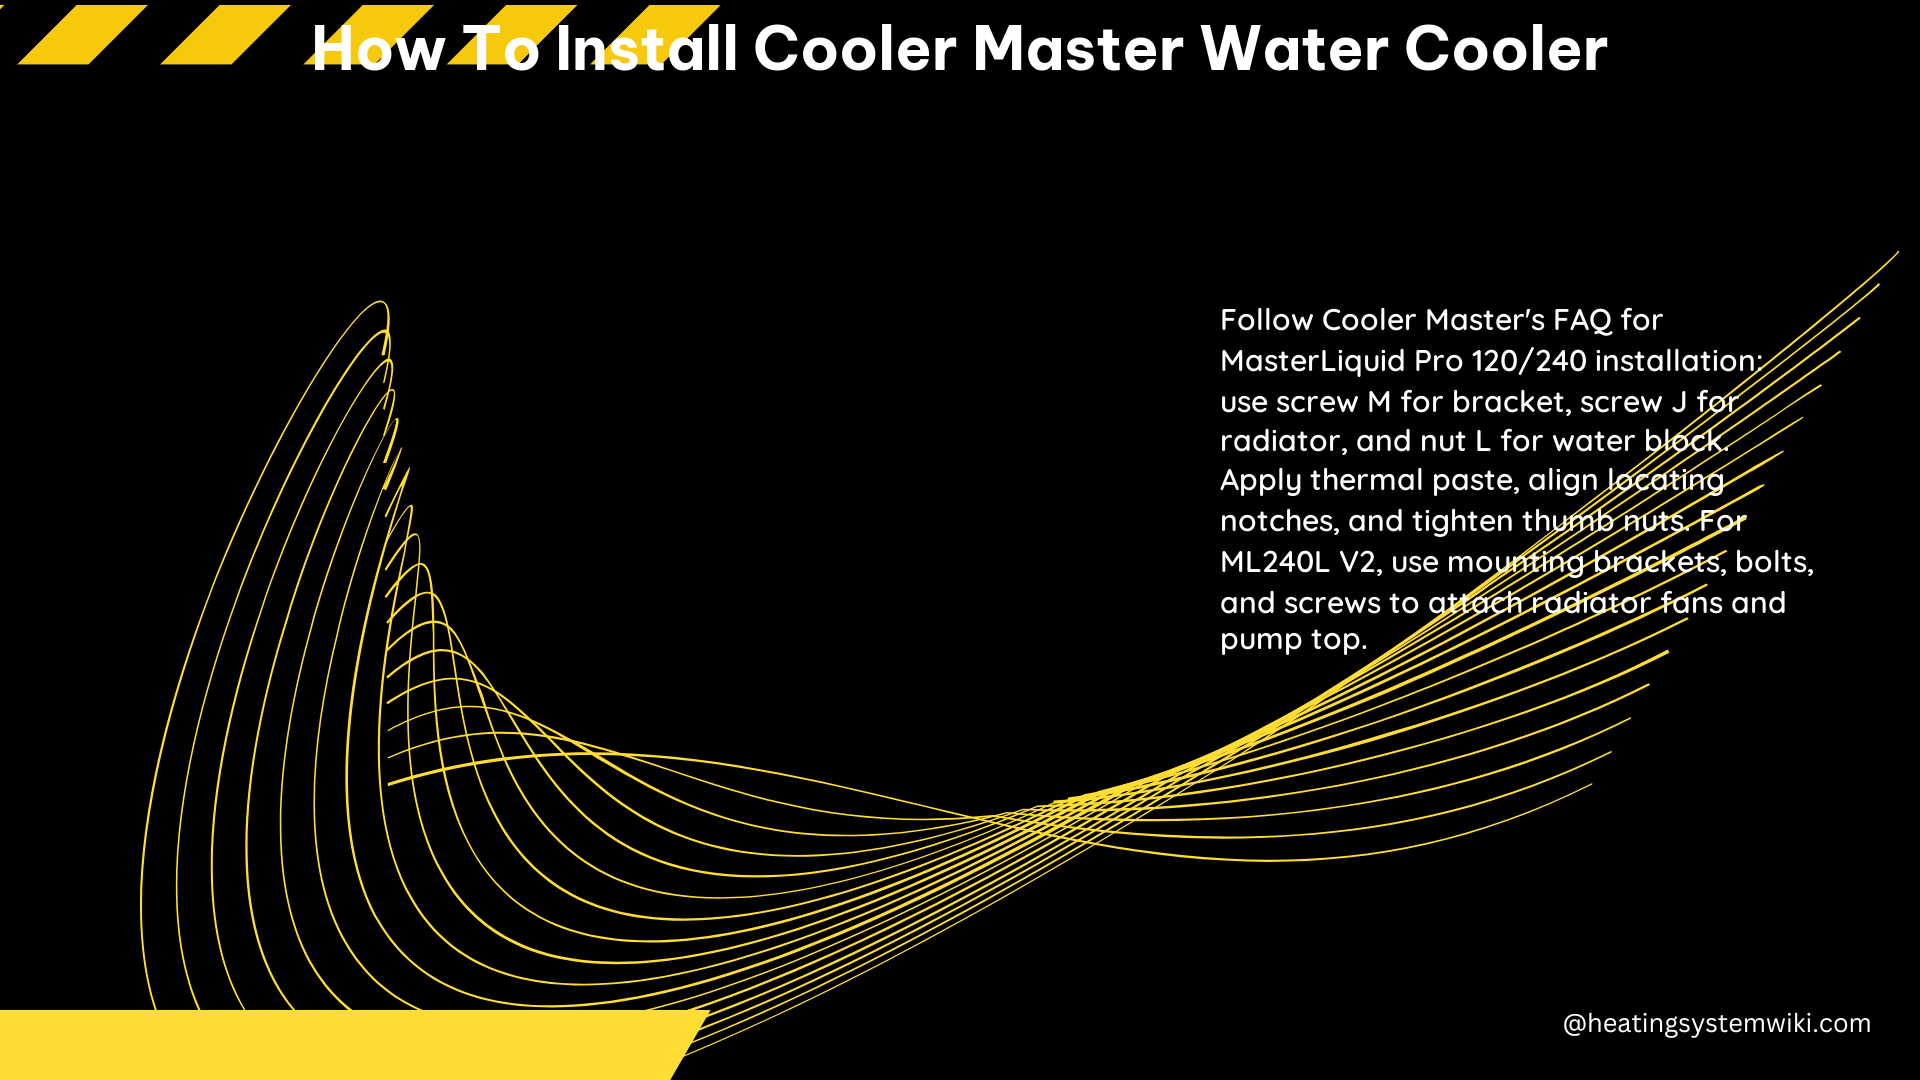 How to Install Cooler Master Water Cooler